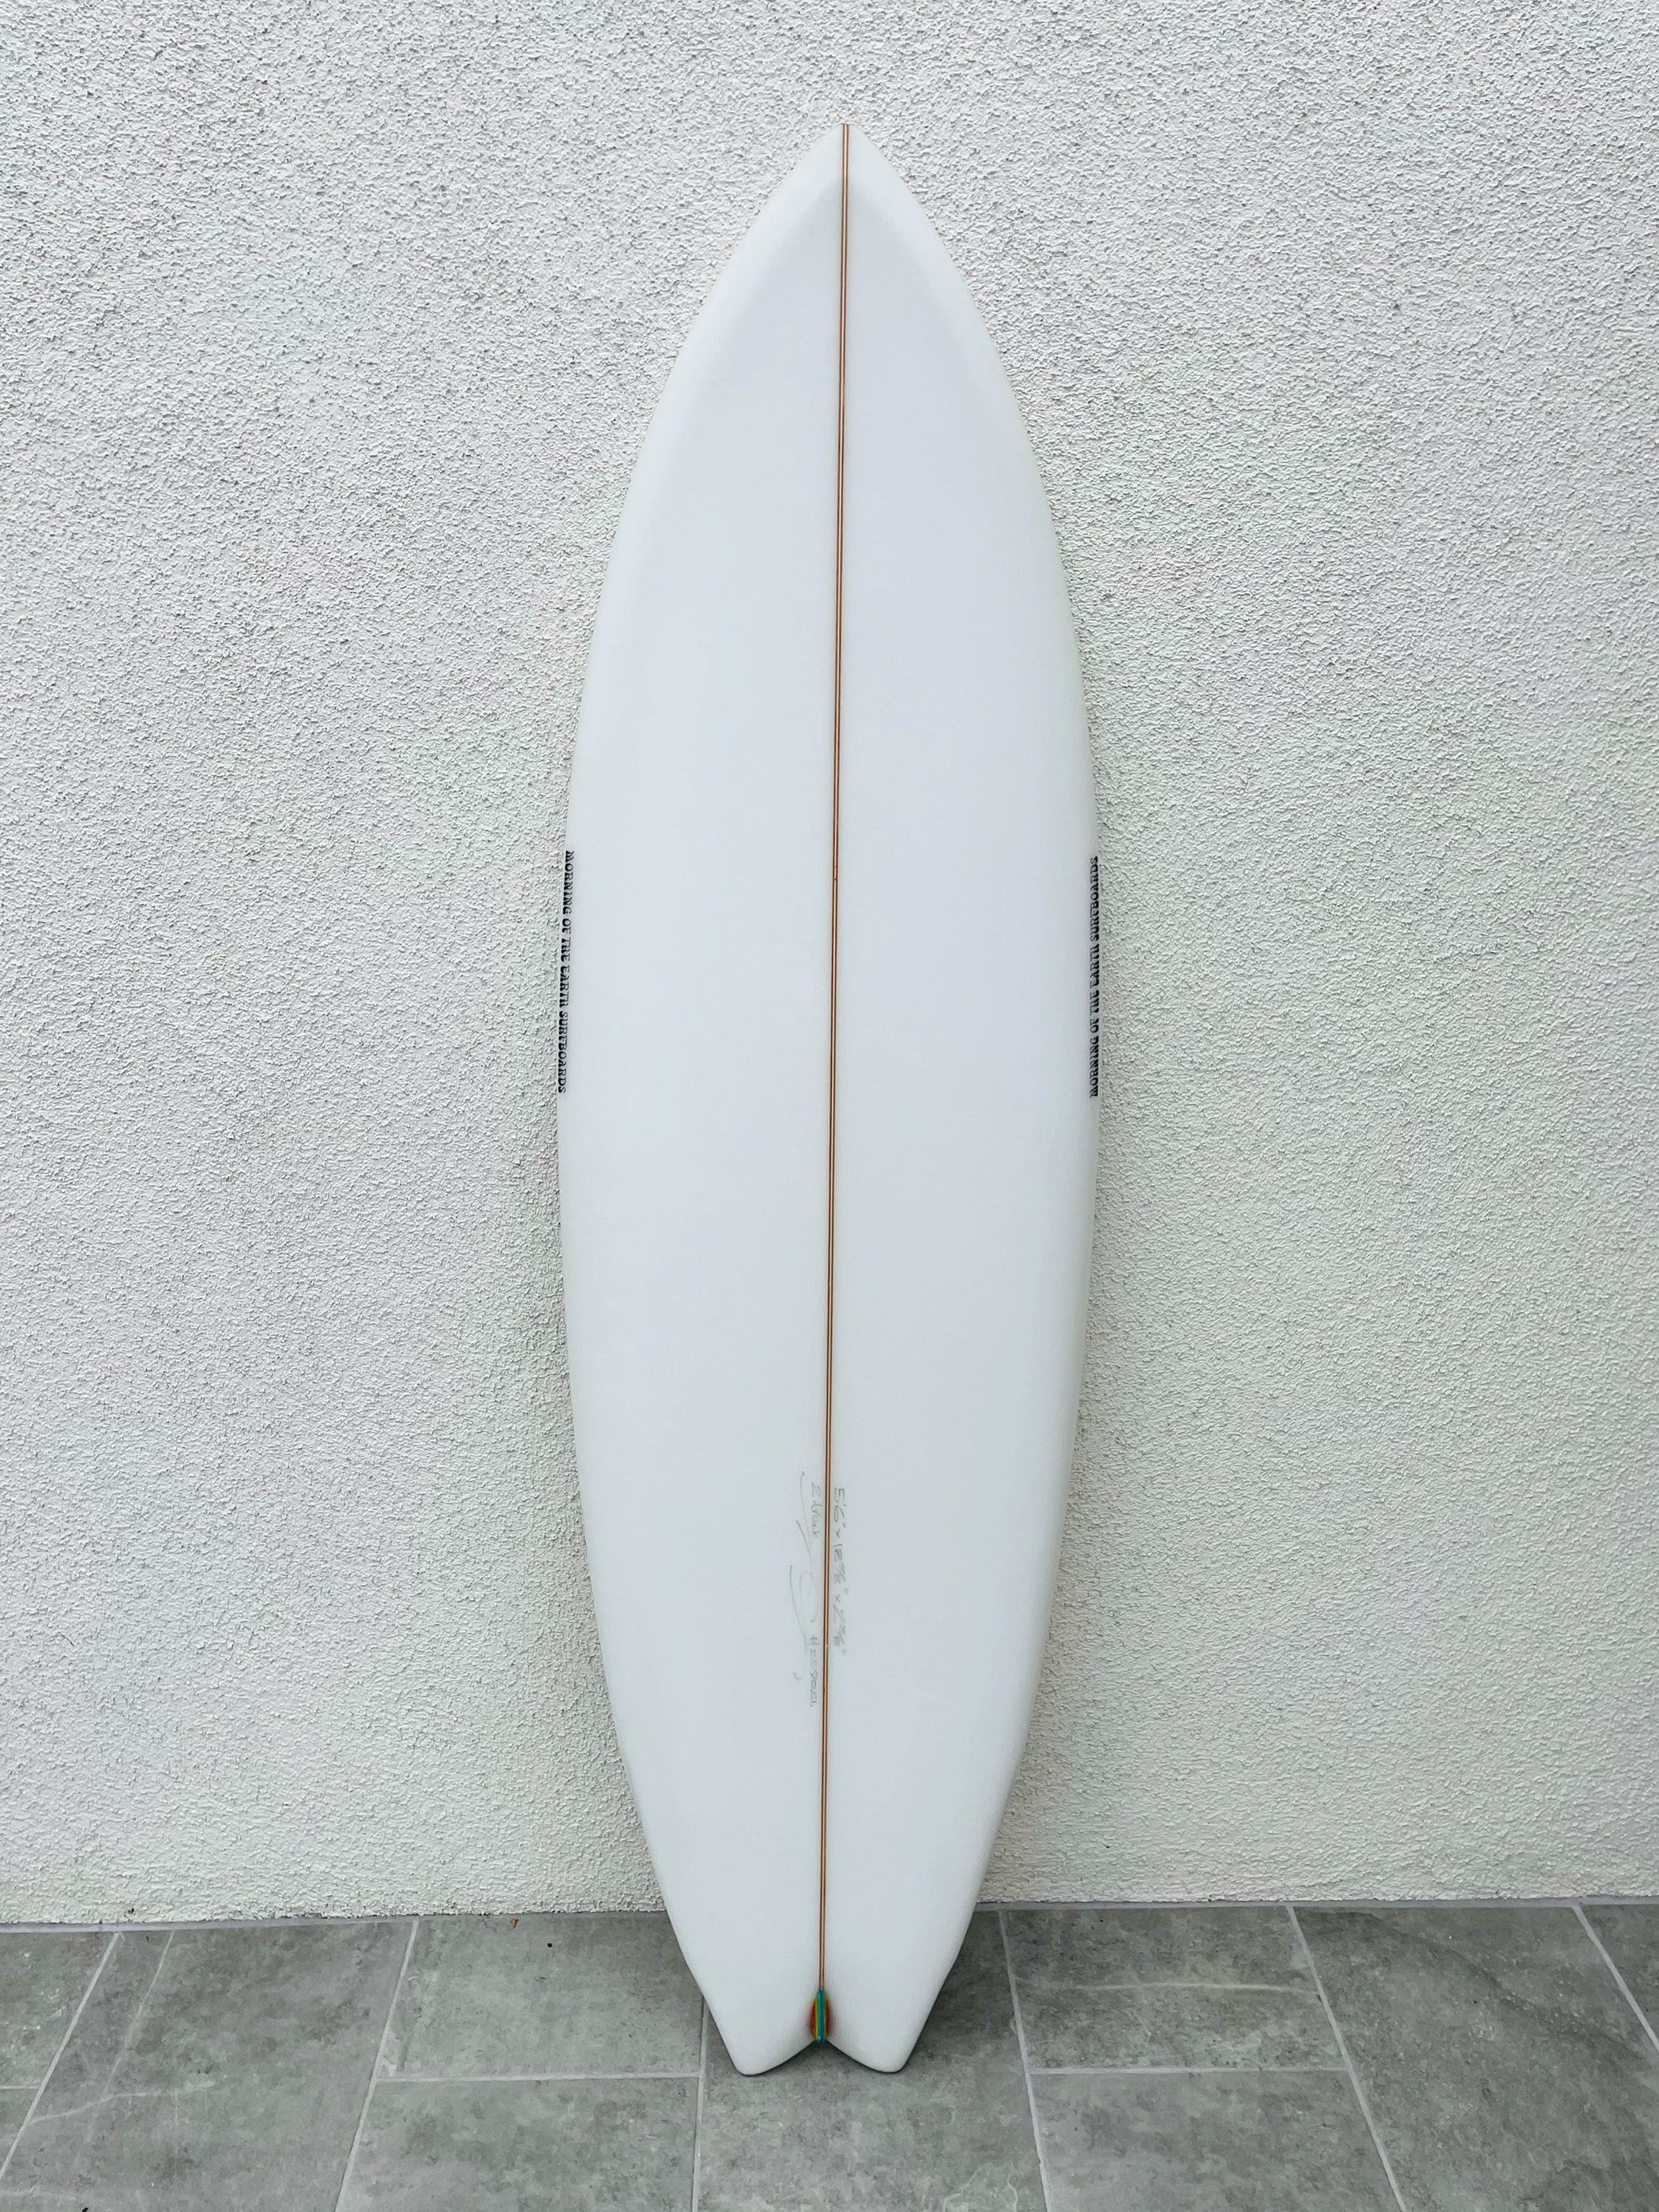 Morning Of The Earth | 5’6” Tracks Twinny Clear Surfboard (USED)